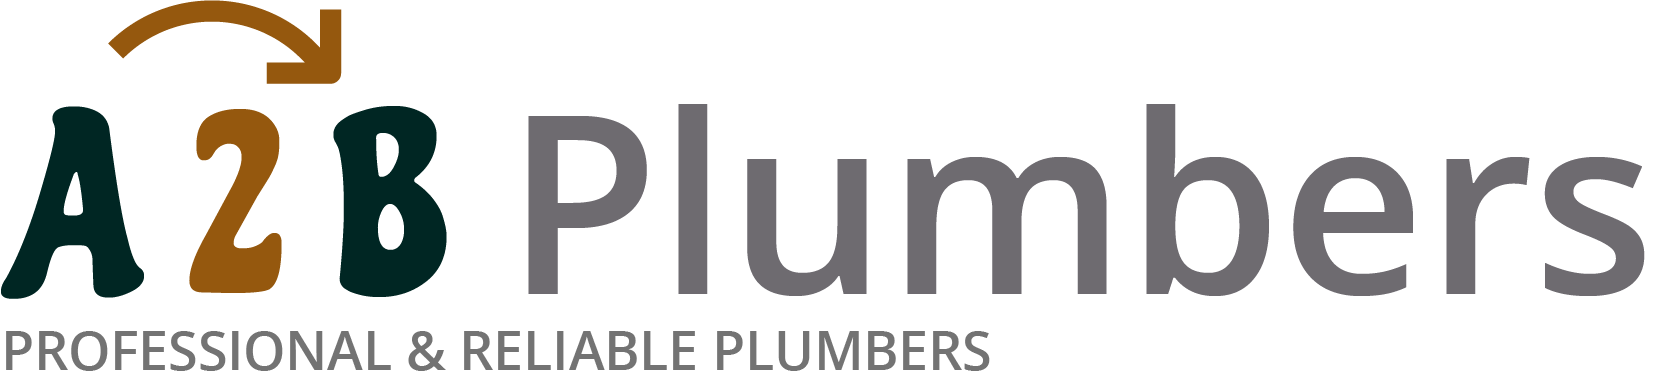 If you need a boiler installed, a radiator repaired or a leaking tap fixed, call us now - we provide services for properties in Soham and the local area.